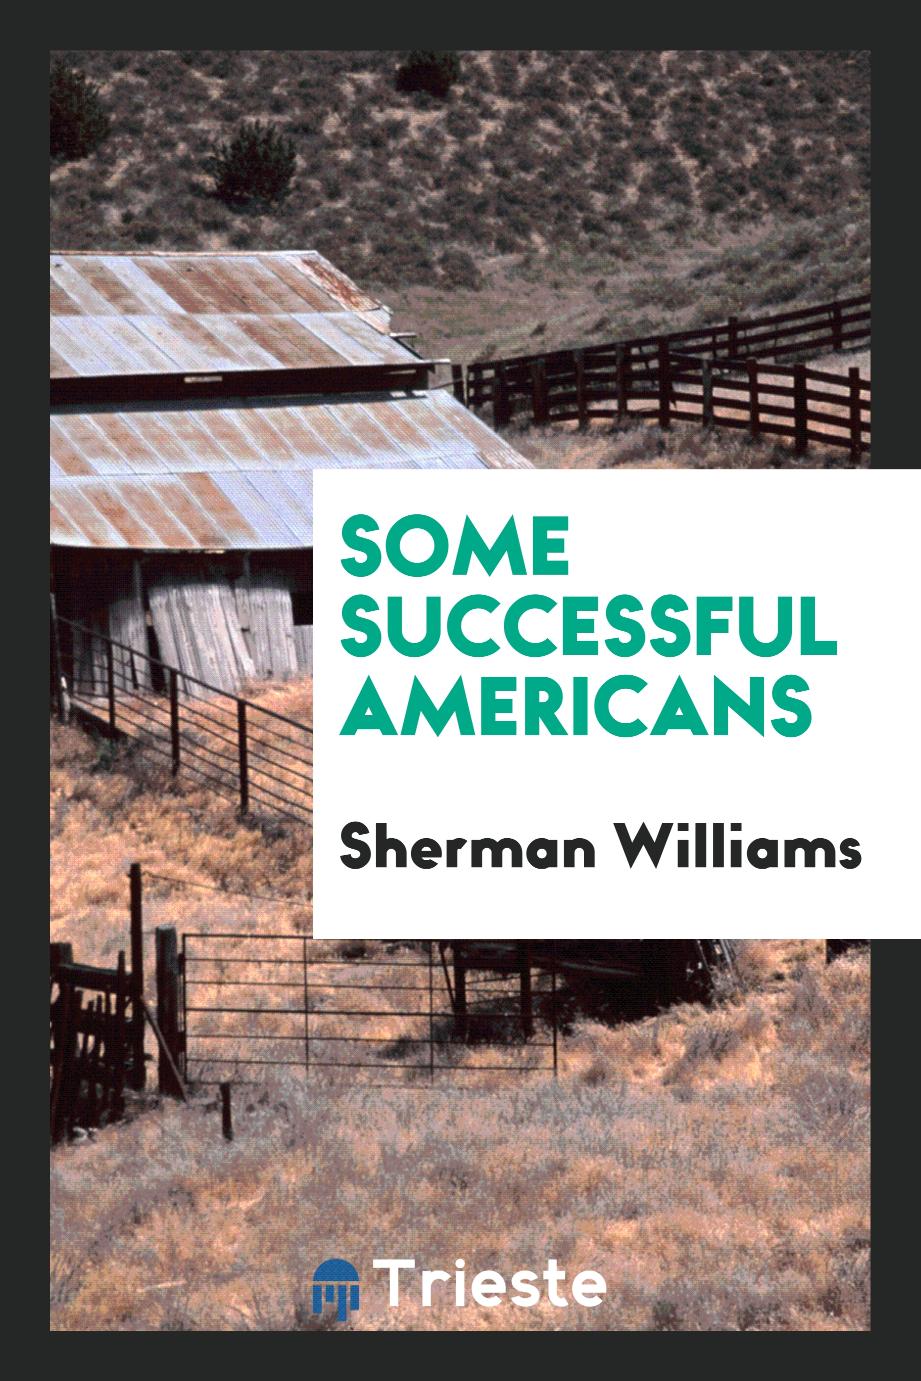 Sherman Williams - Some successful Americans